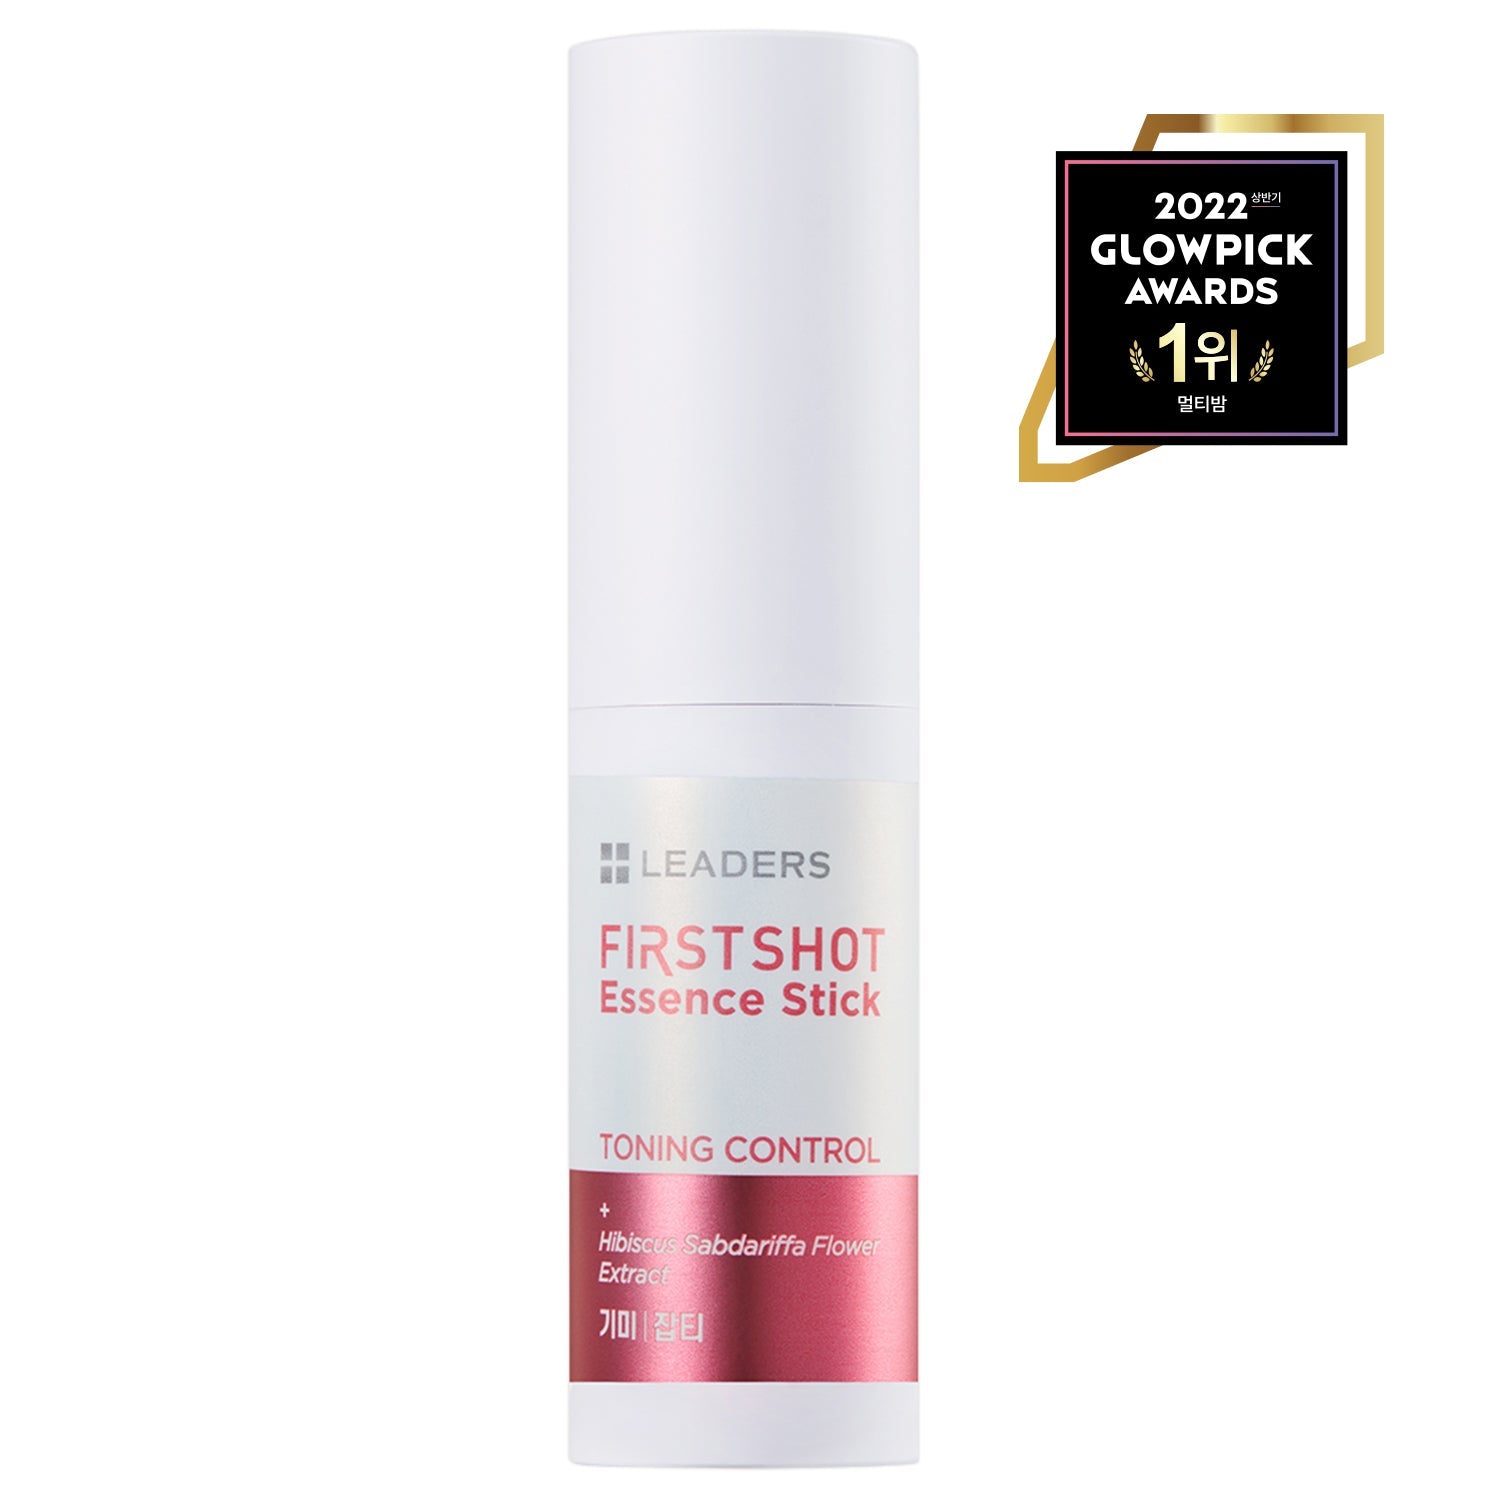 First Shot Essence Stick Toning Control | Leaders